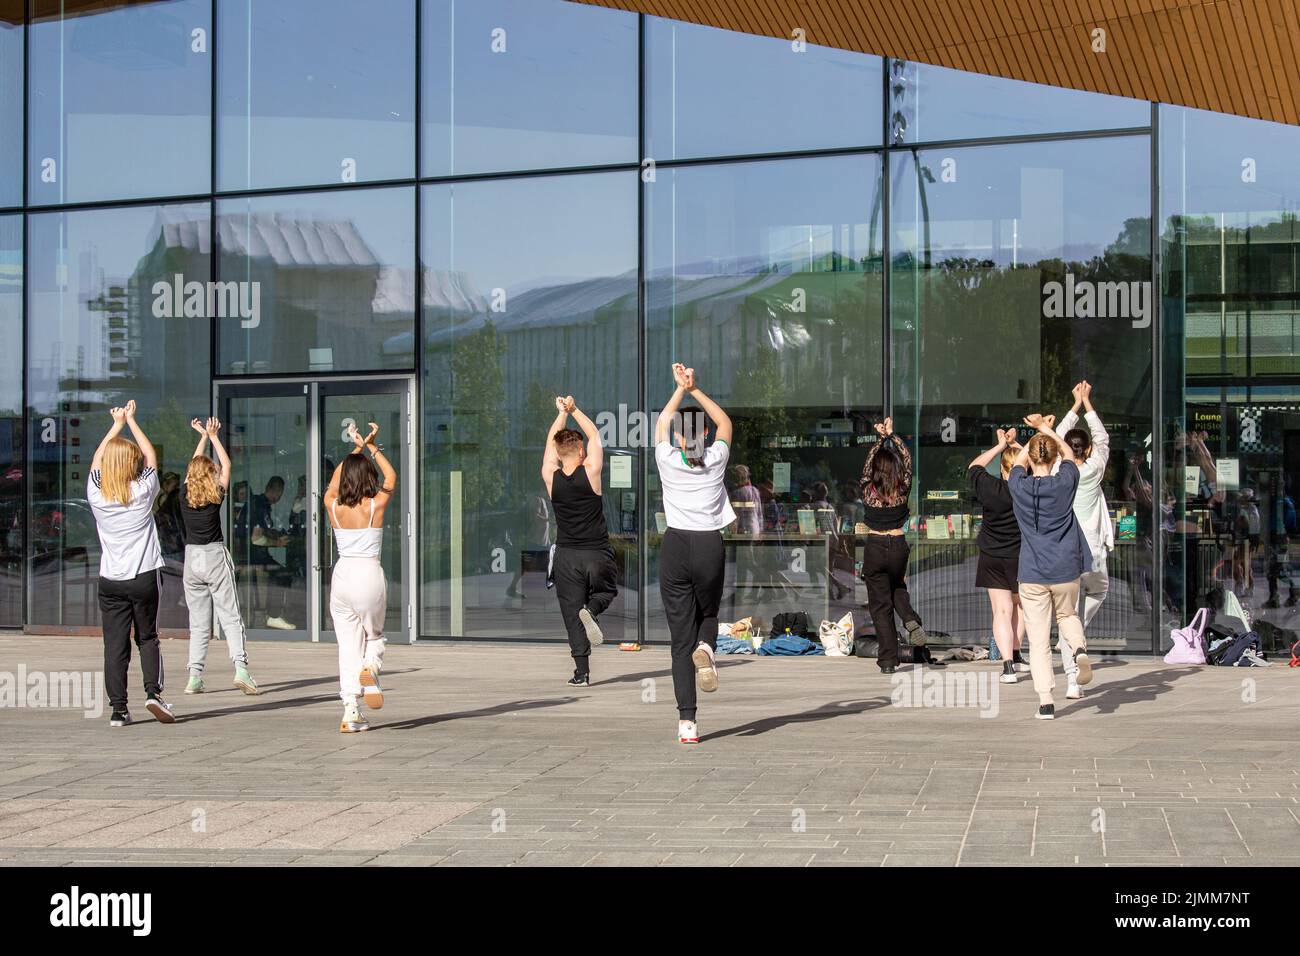 Young adults or teenagers practising dance moves in front of Oodi library in Helsinki, Finland Stock Photo